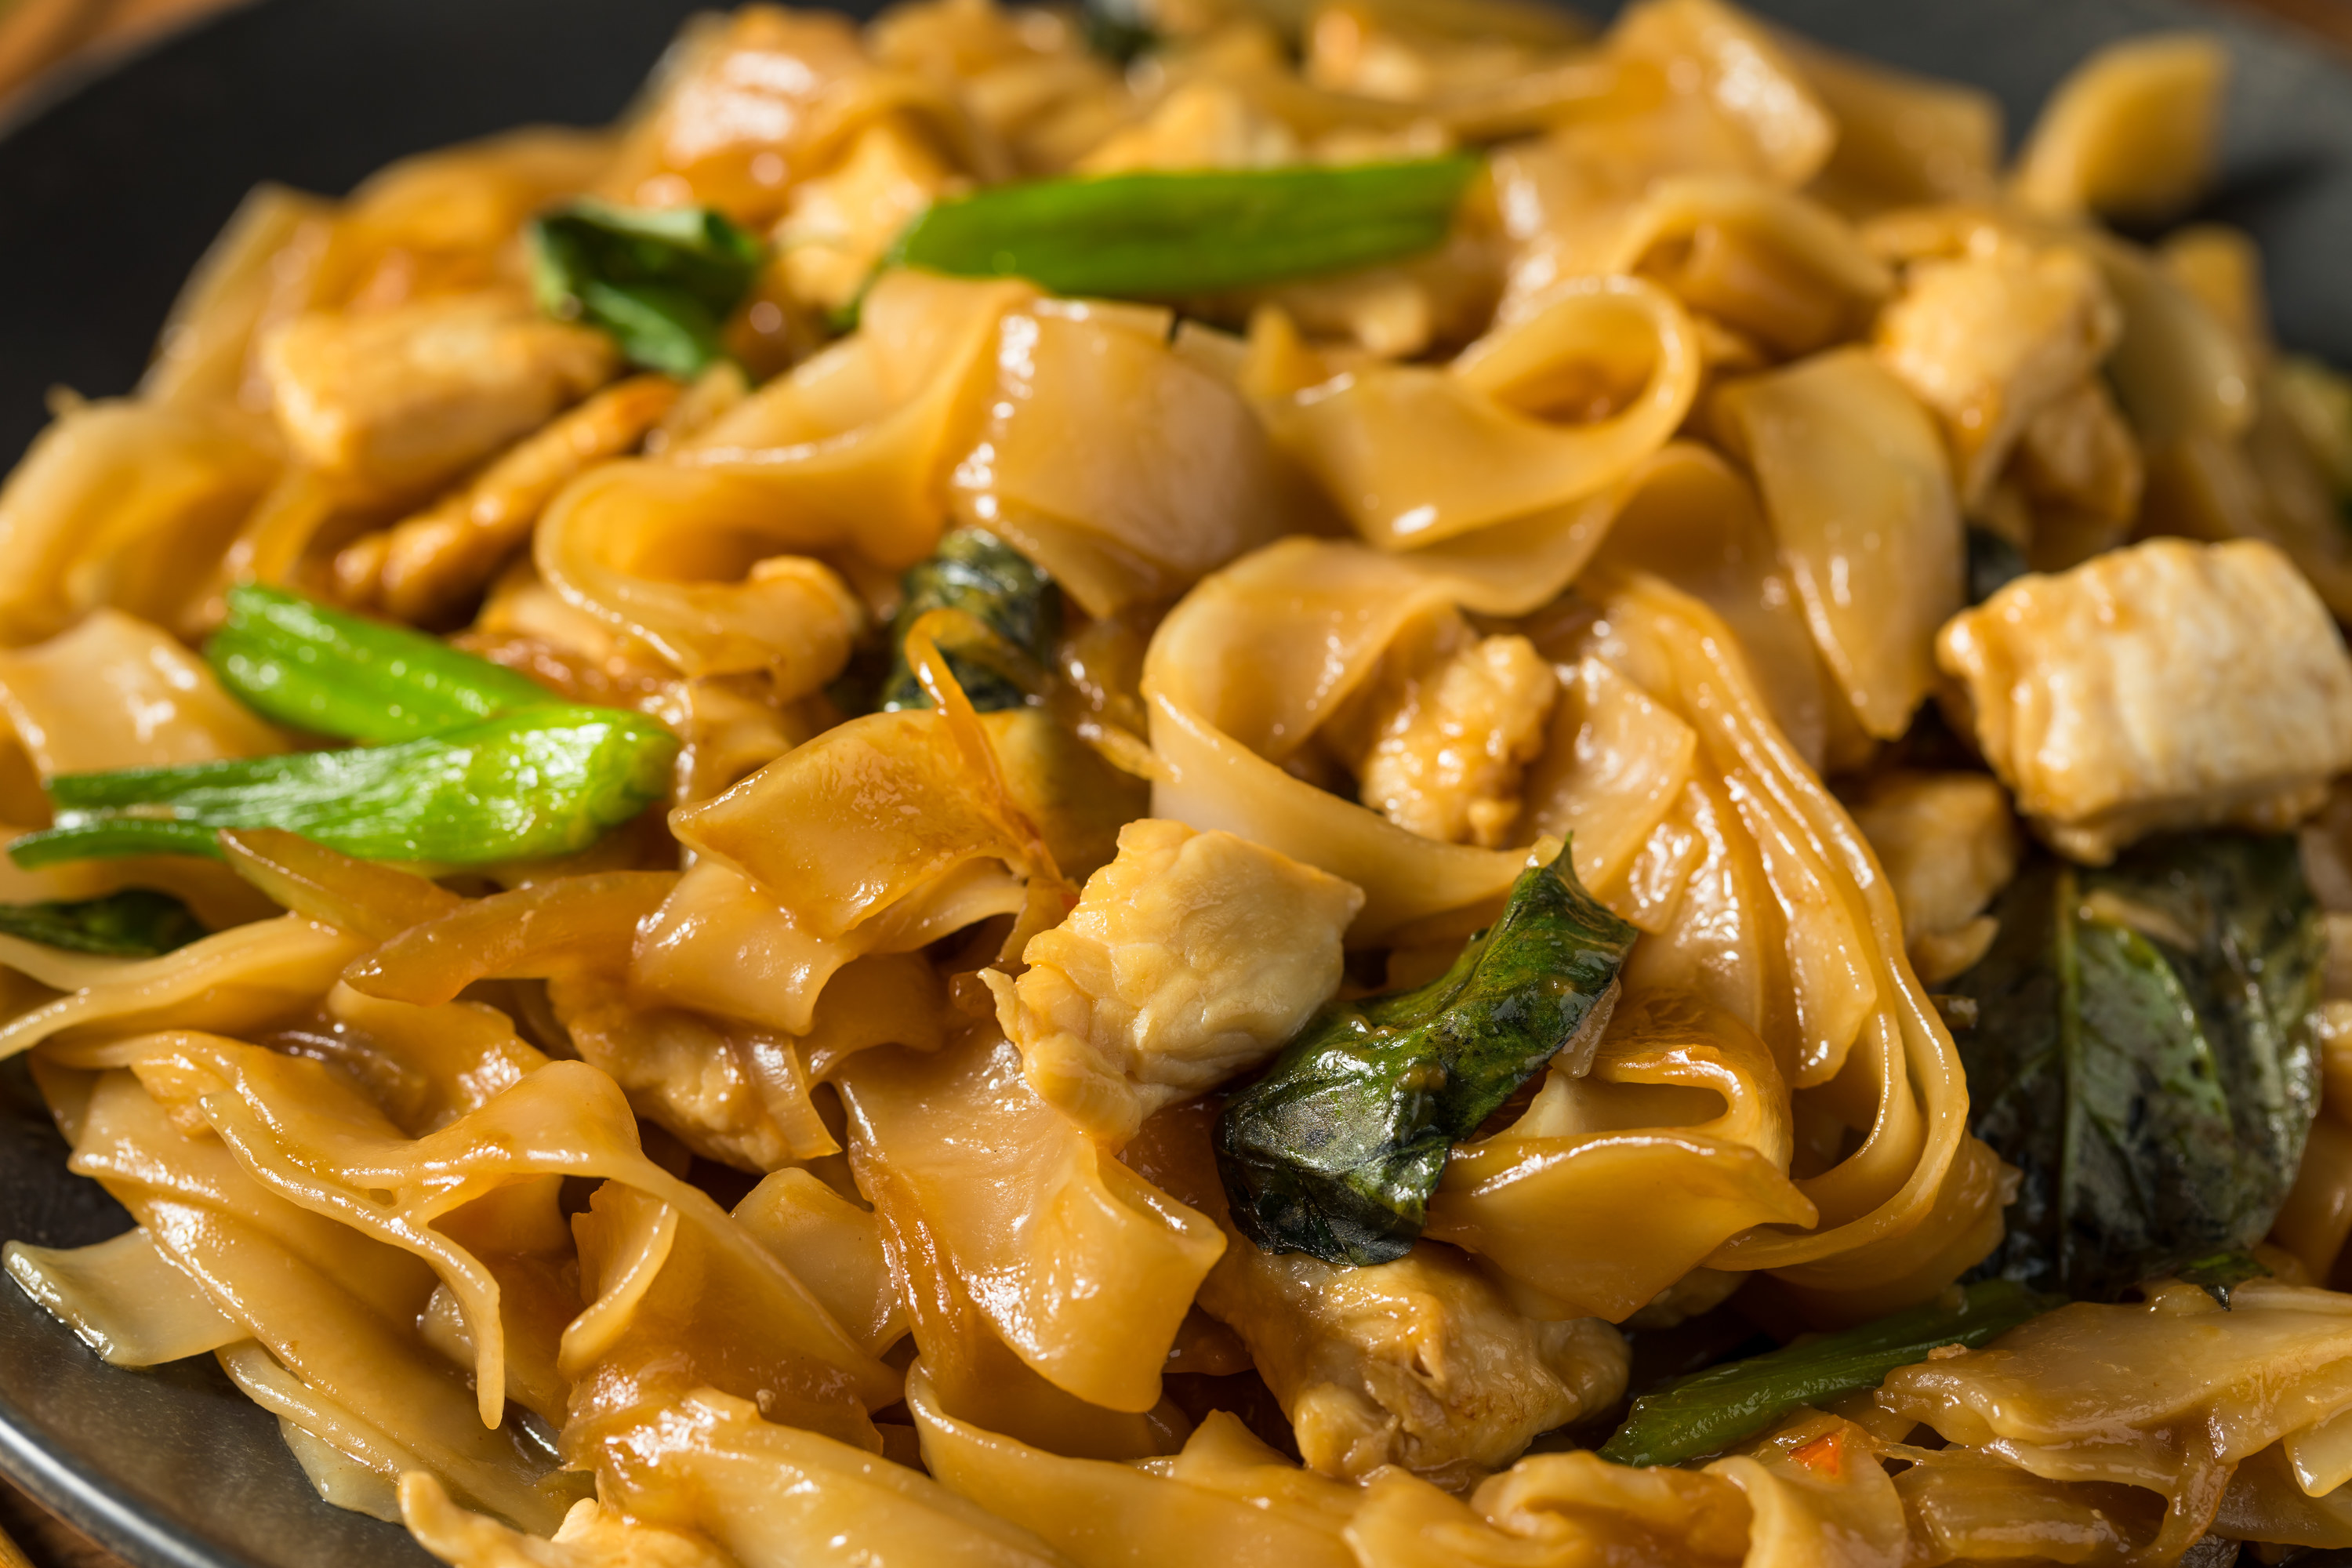 Wide noodles with chicken and basil